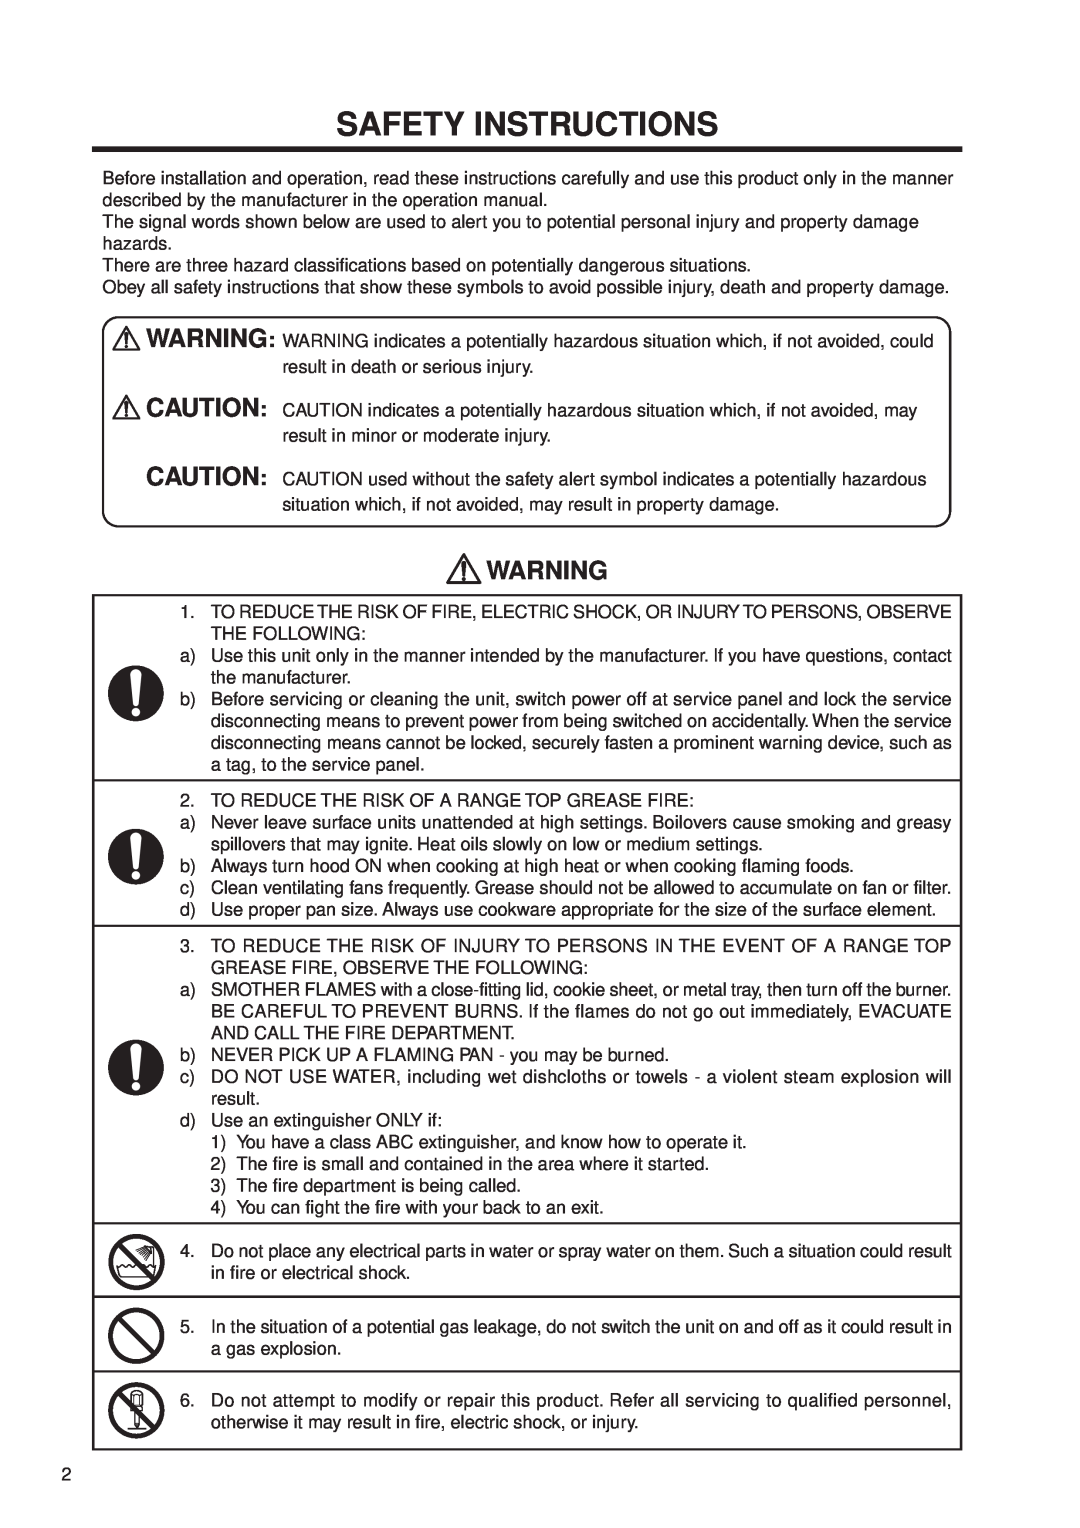 Fujioh FDR-4200D operation manual Safety Instructions 